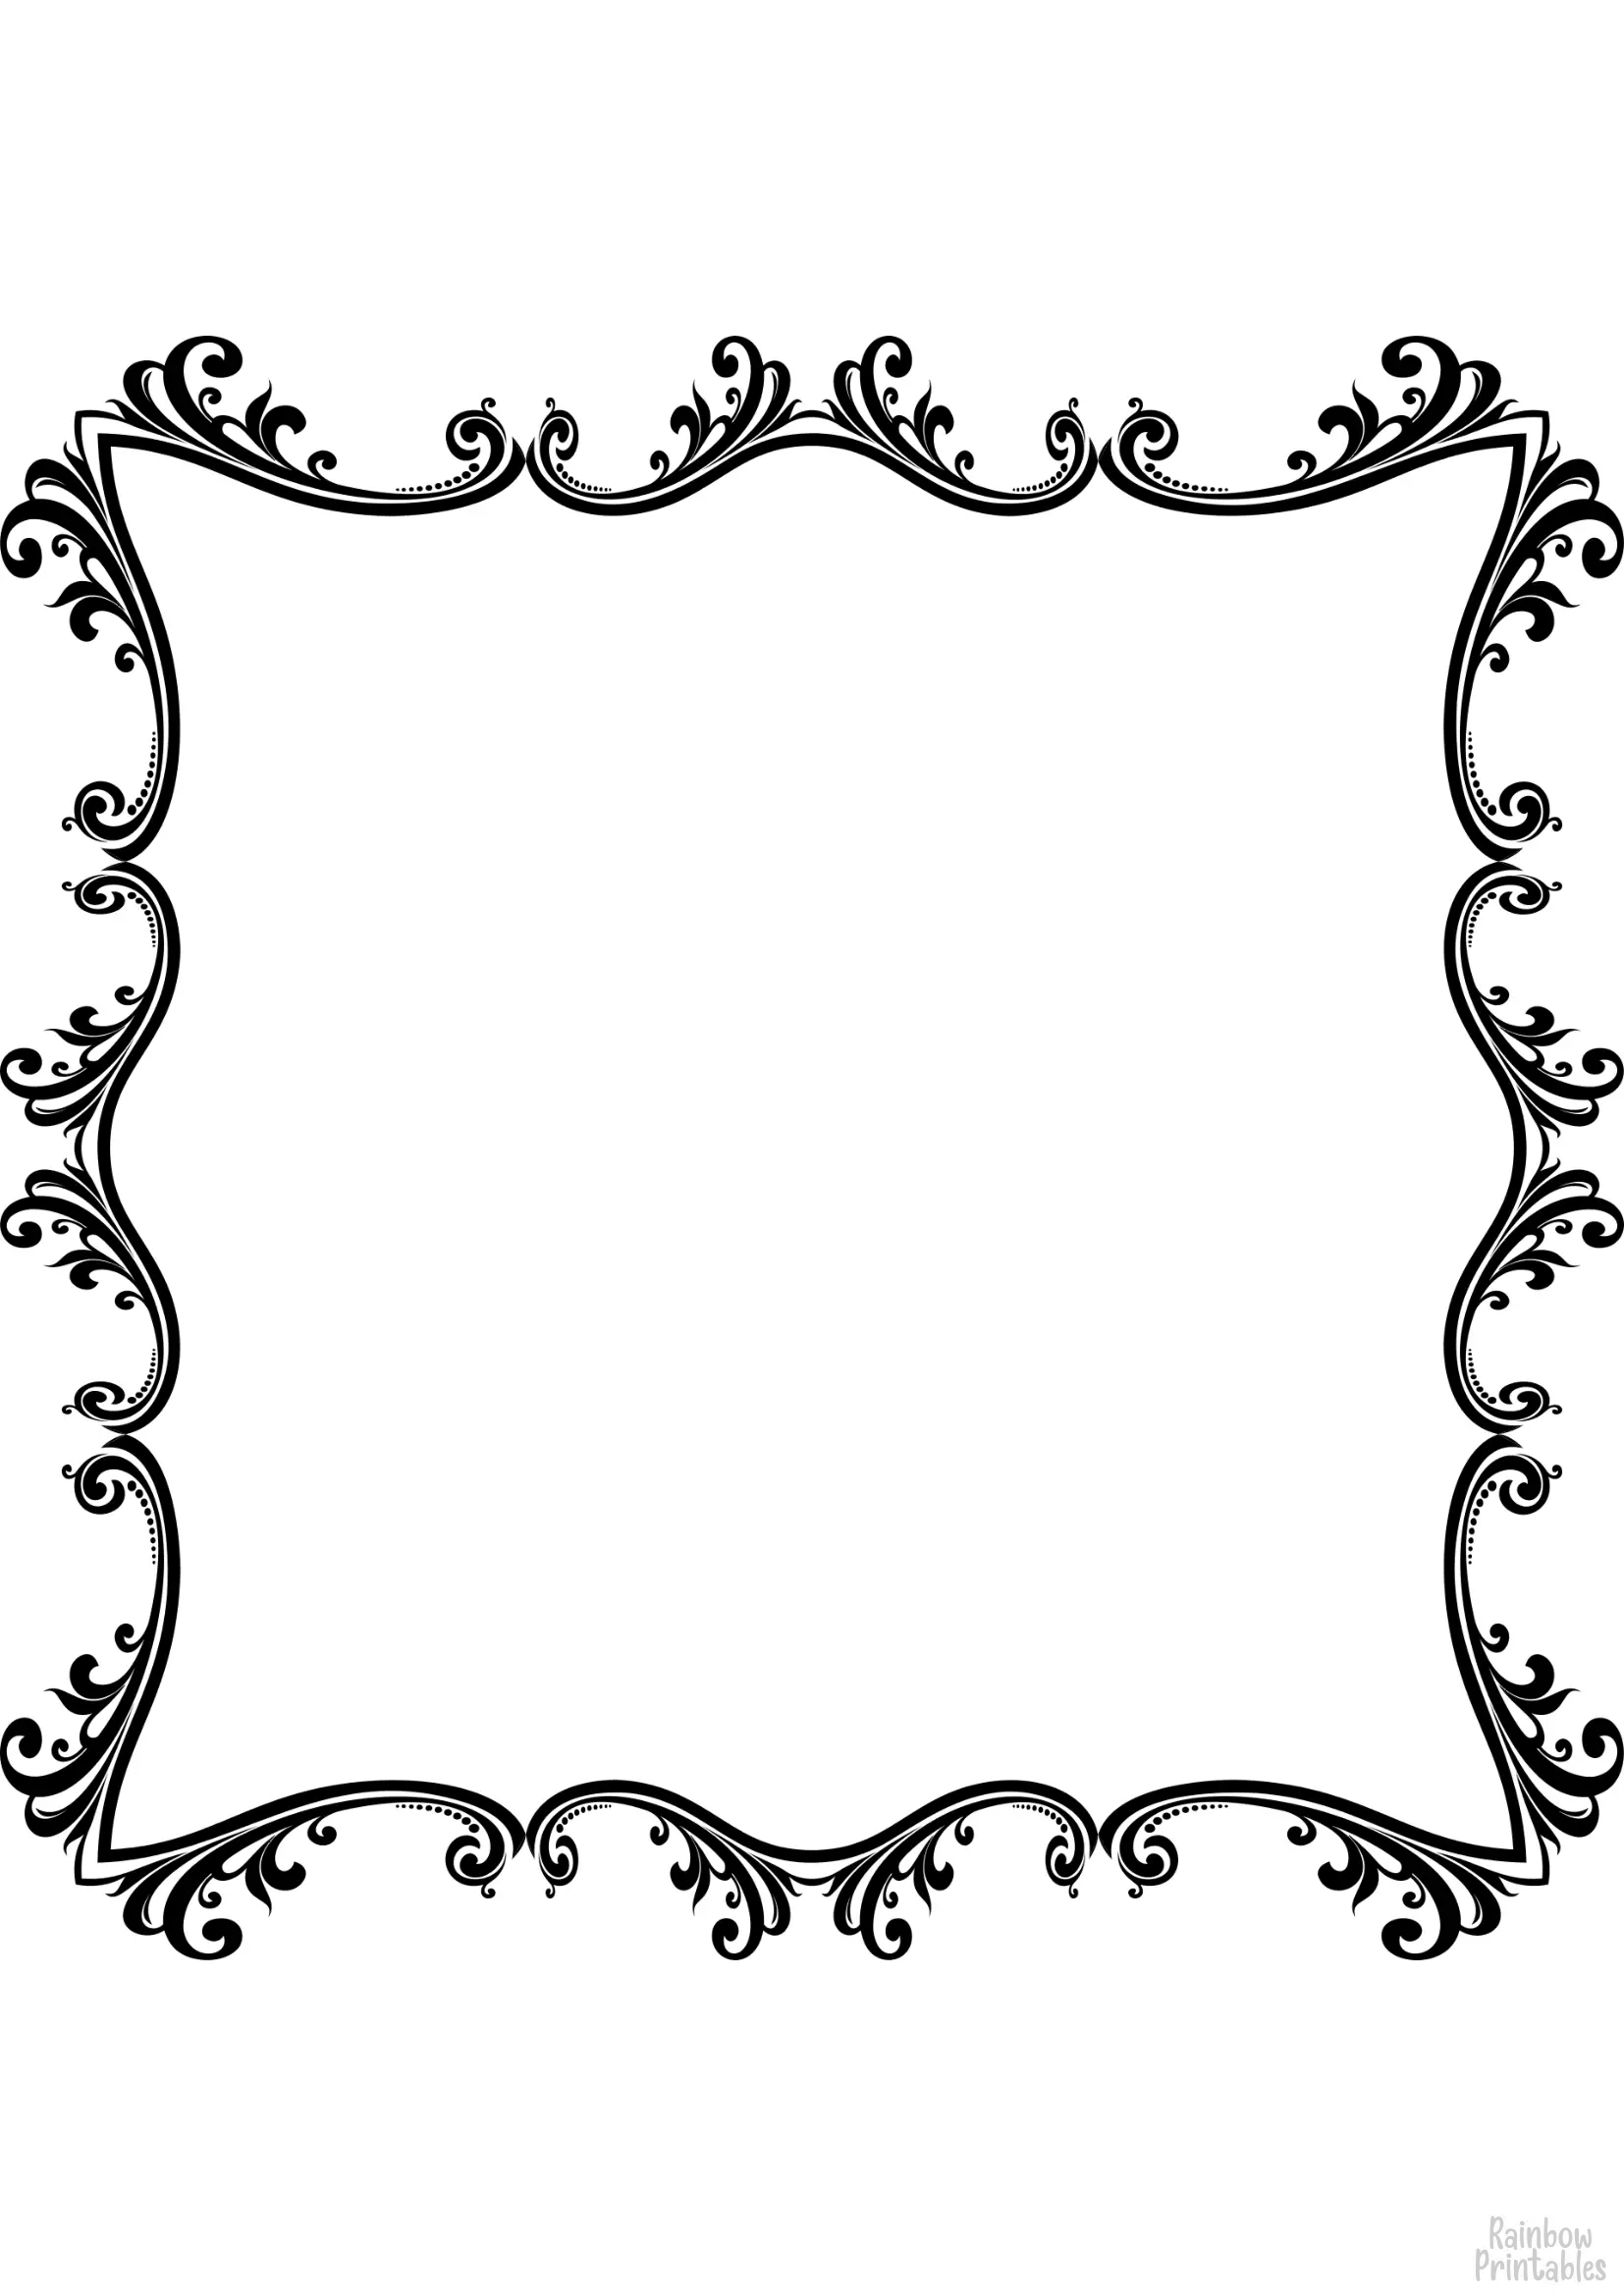 Flourish Black Border Free Clipart Coloring Pages for Kids Adults Art Activities Line Art